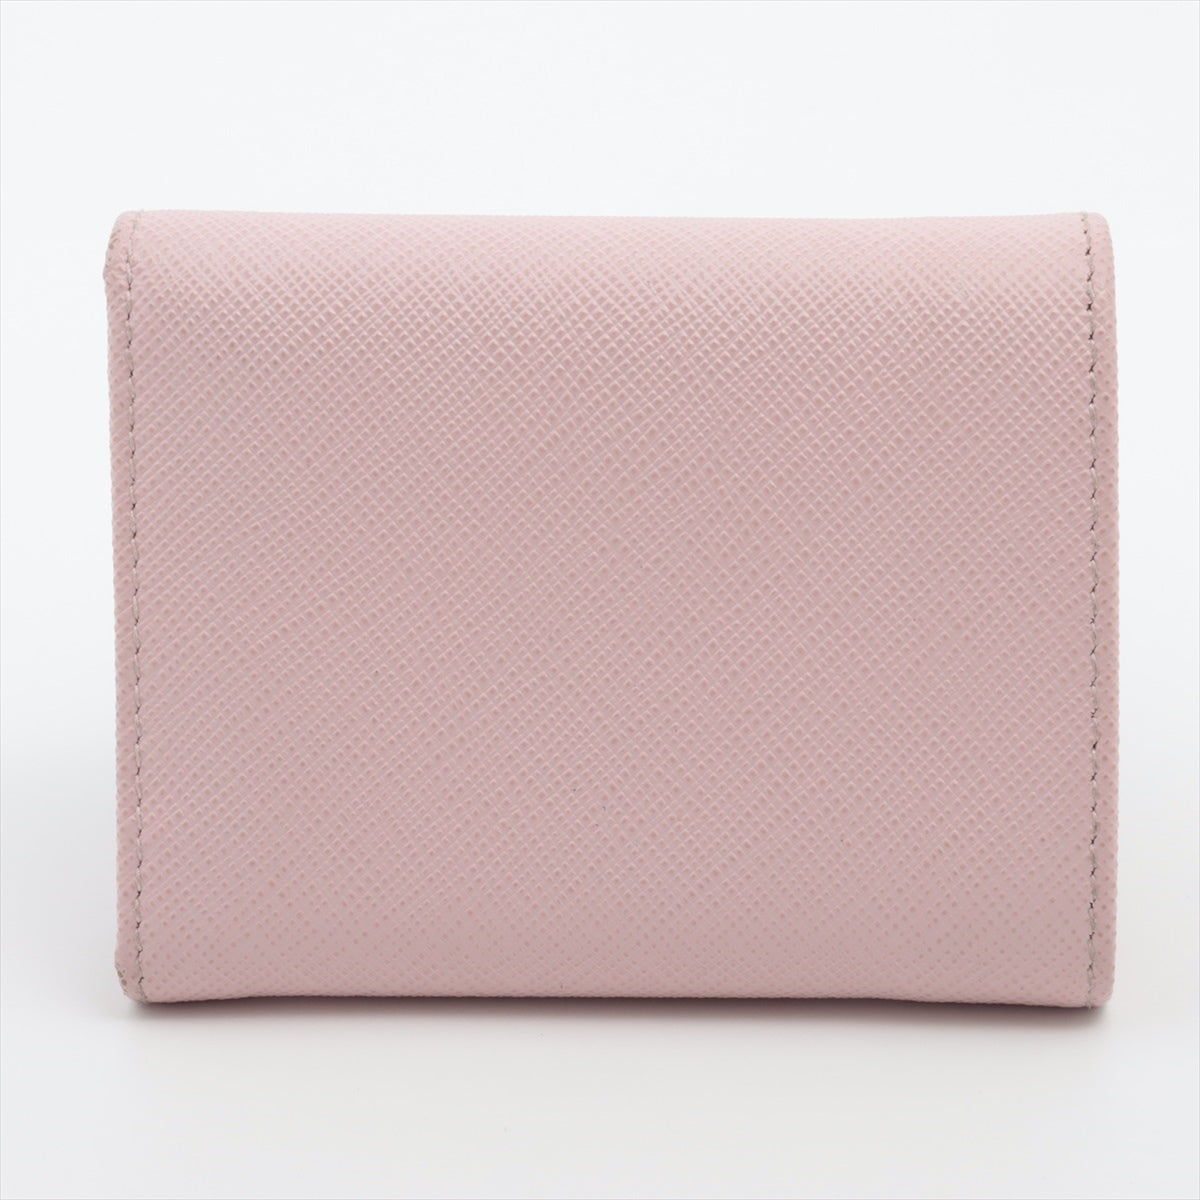 Prada Saffiano 1MH044 Leather Compact Wallet Pink